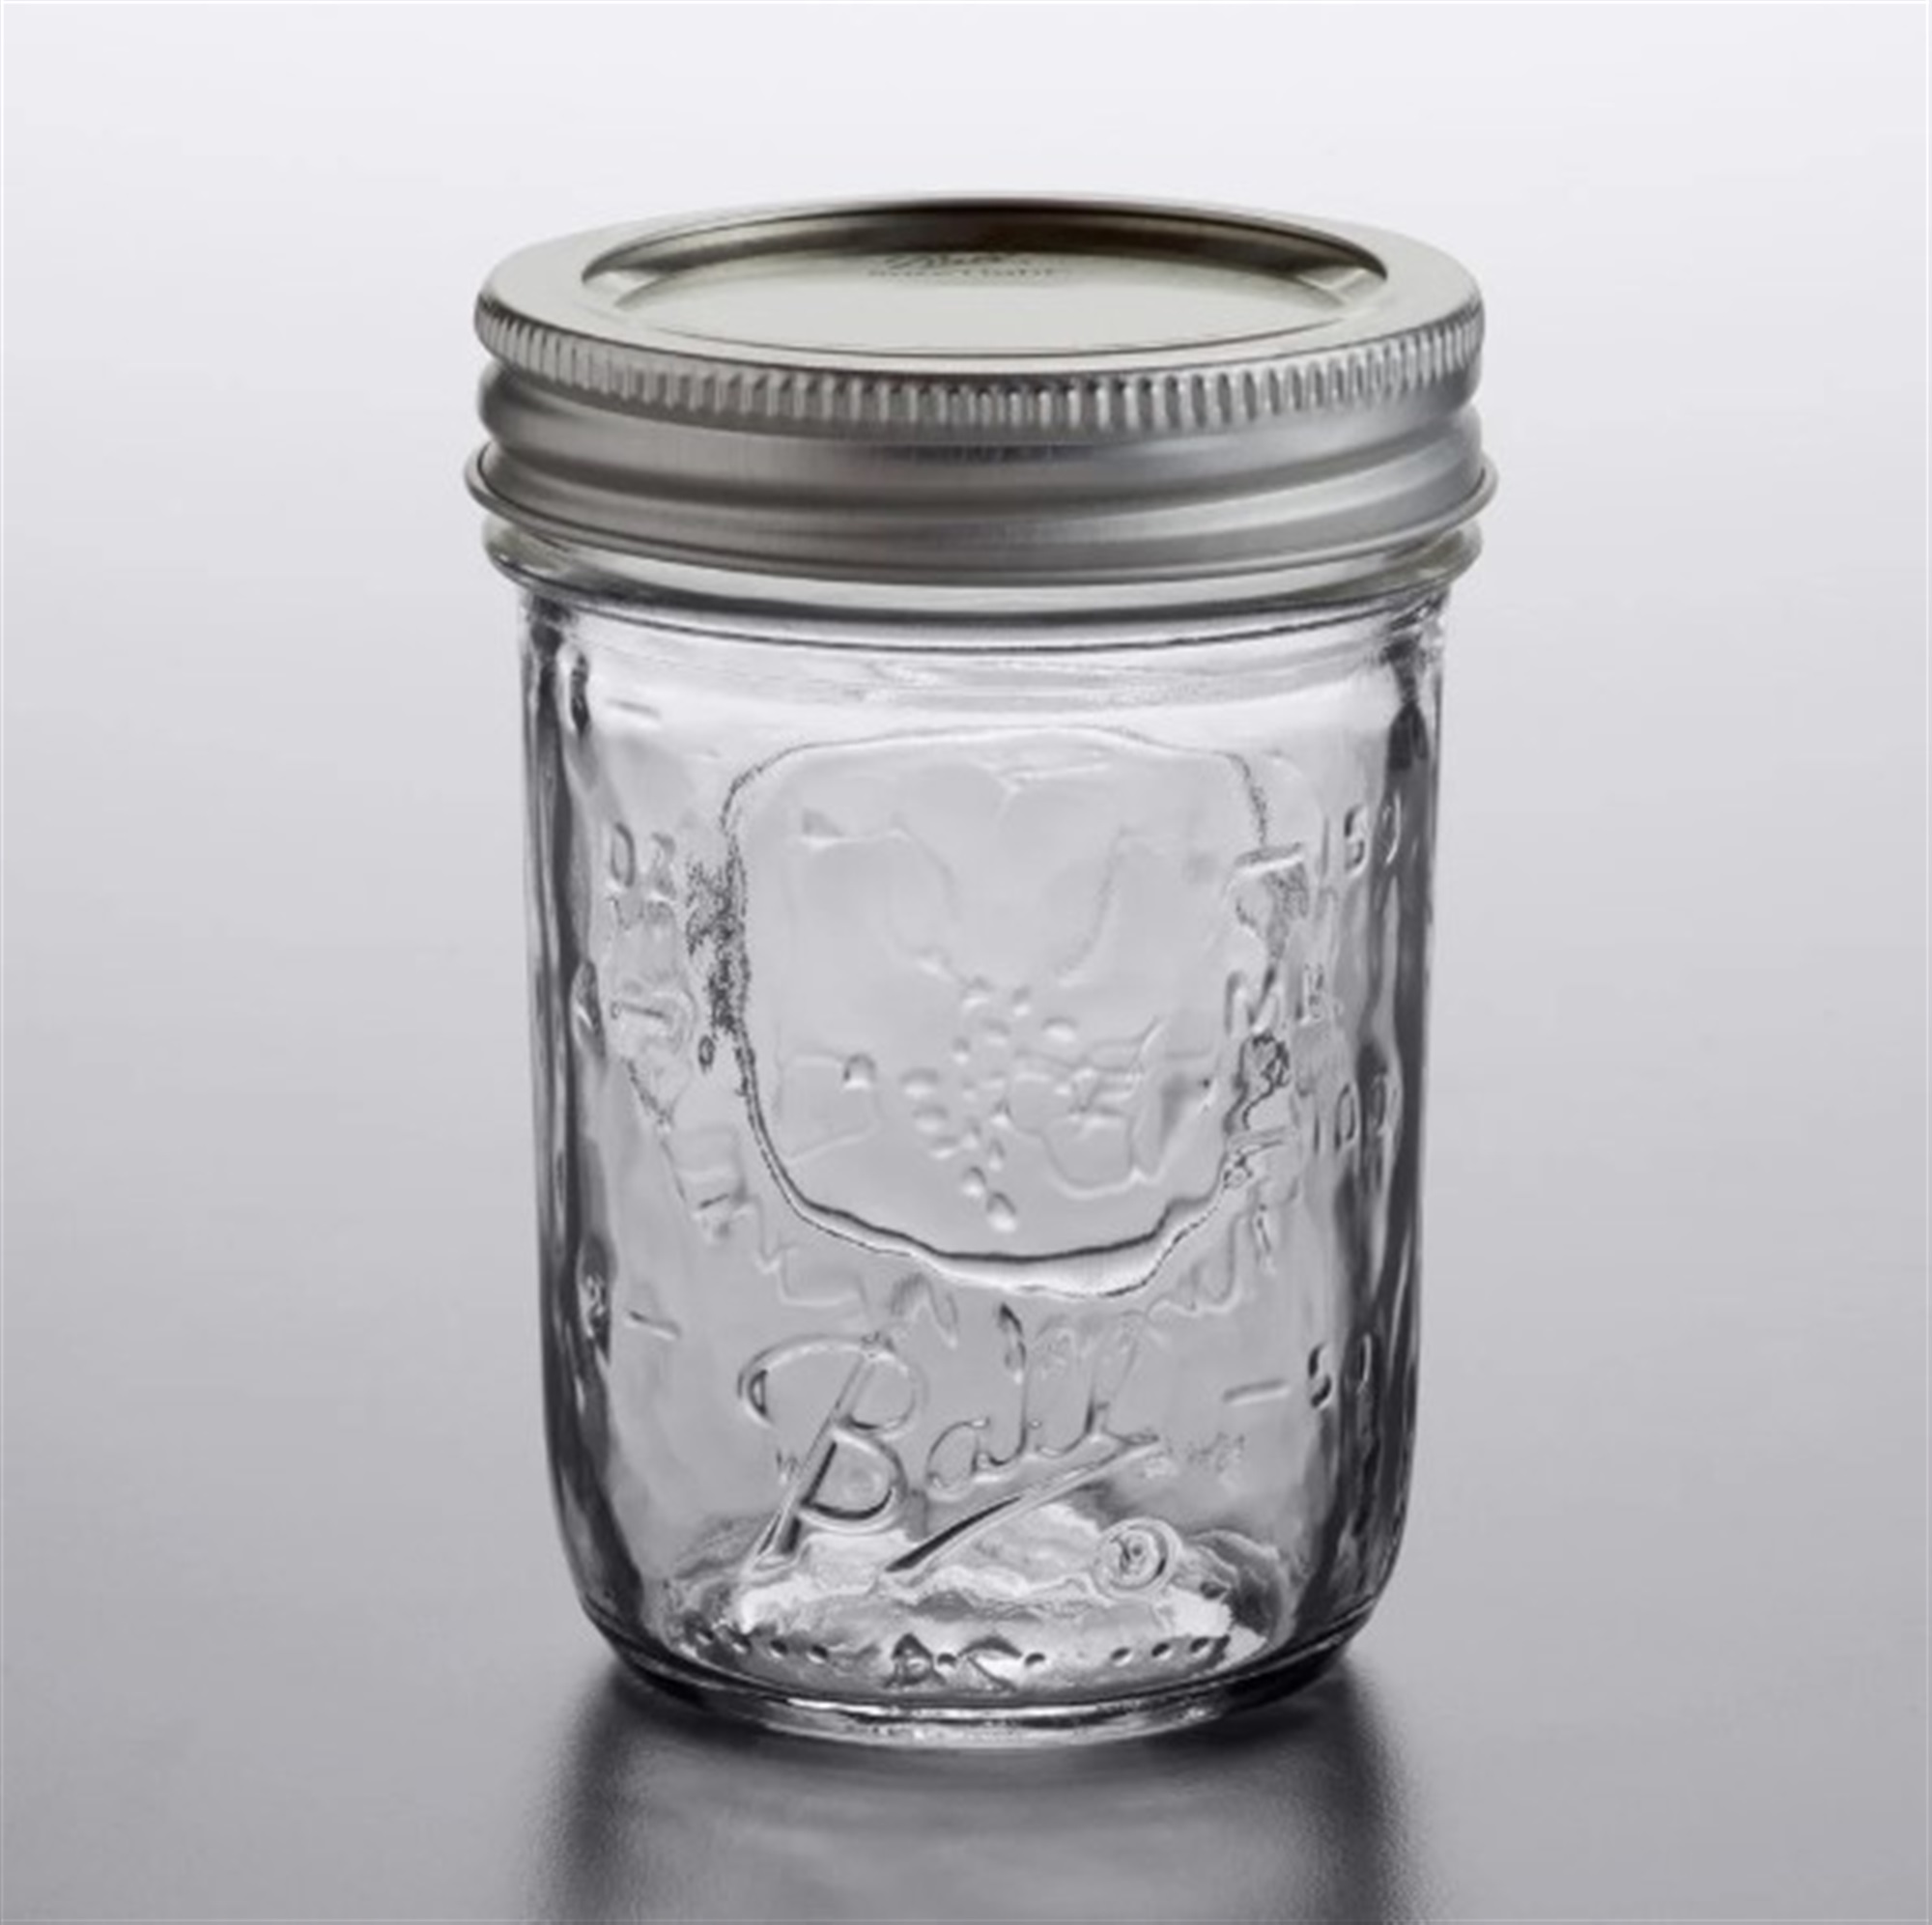 Ball Mason Jars With Lids & Bands, Regular Mouth, 8 oz, 12 Pack - image 2 of 3